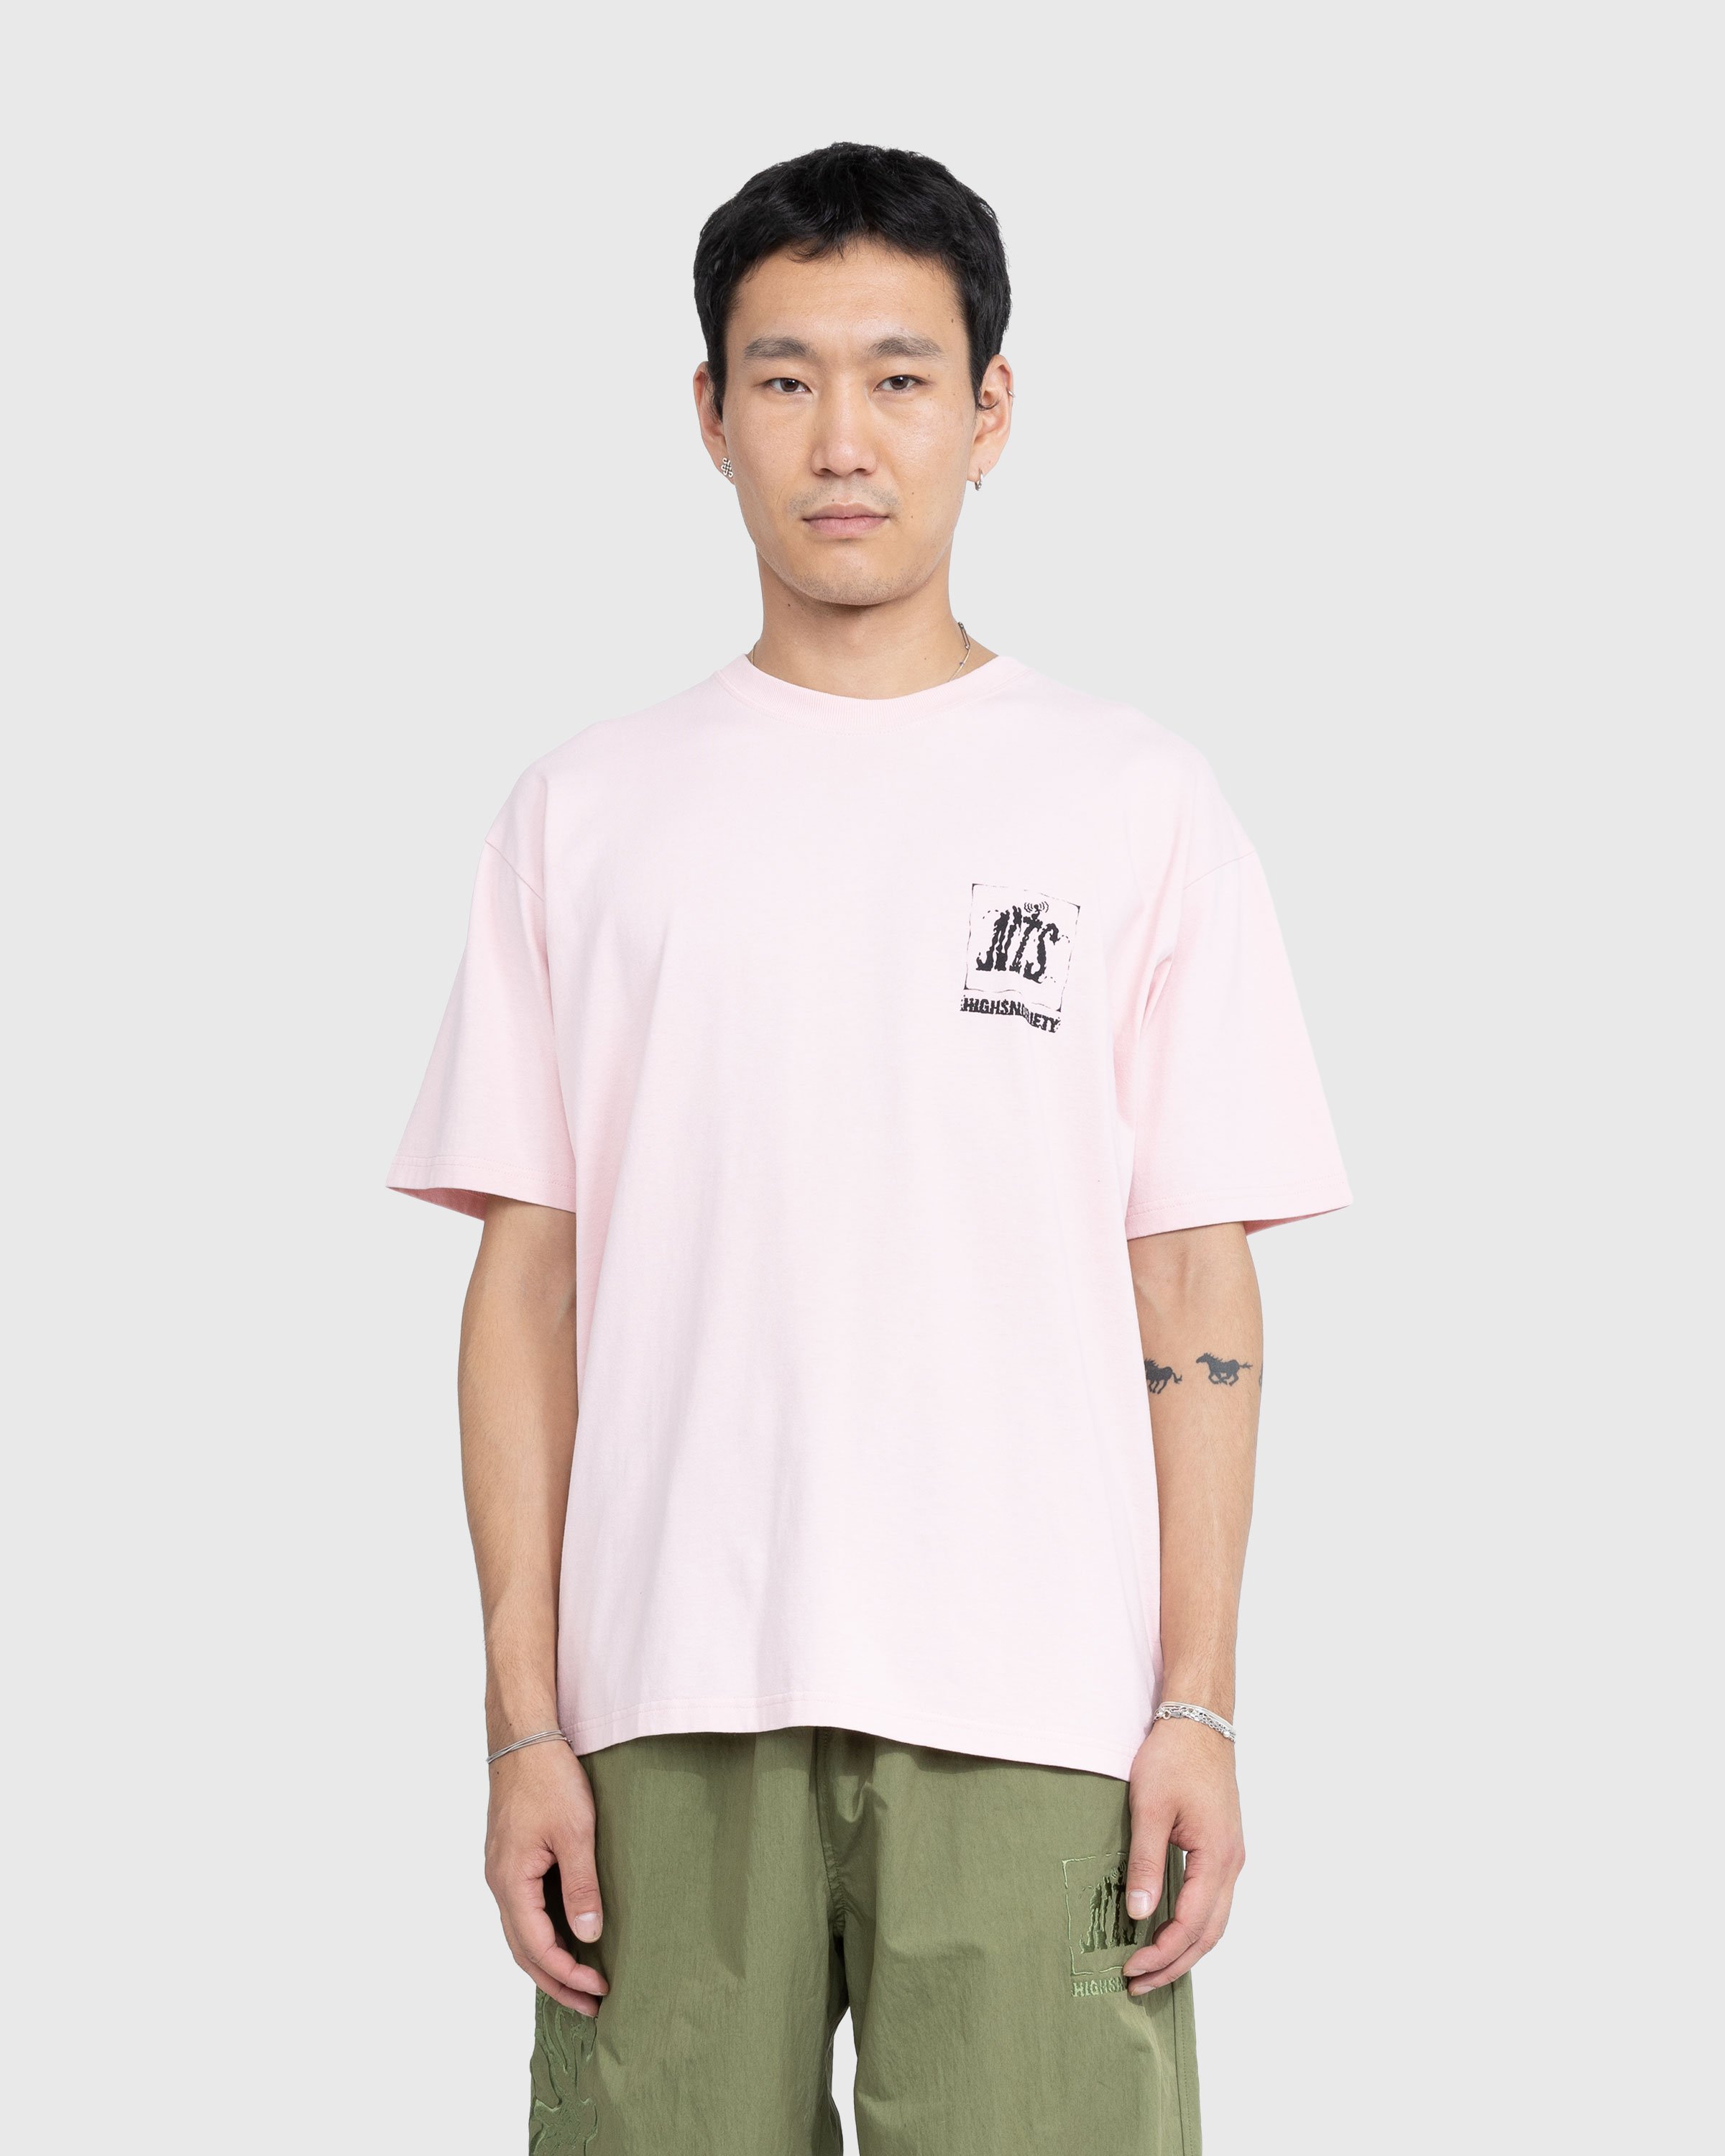 NTS x Highsnobiety - Graphic T-Shirt Pink - Clothing - Pink - Image 3